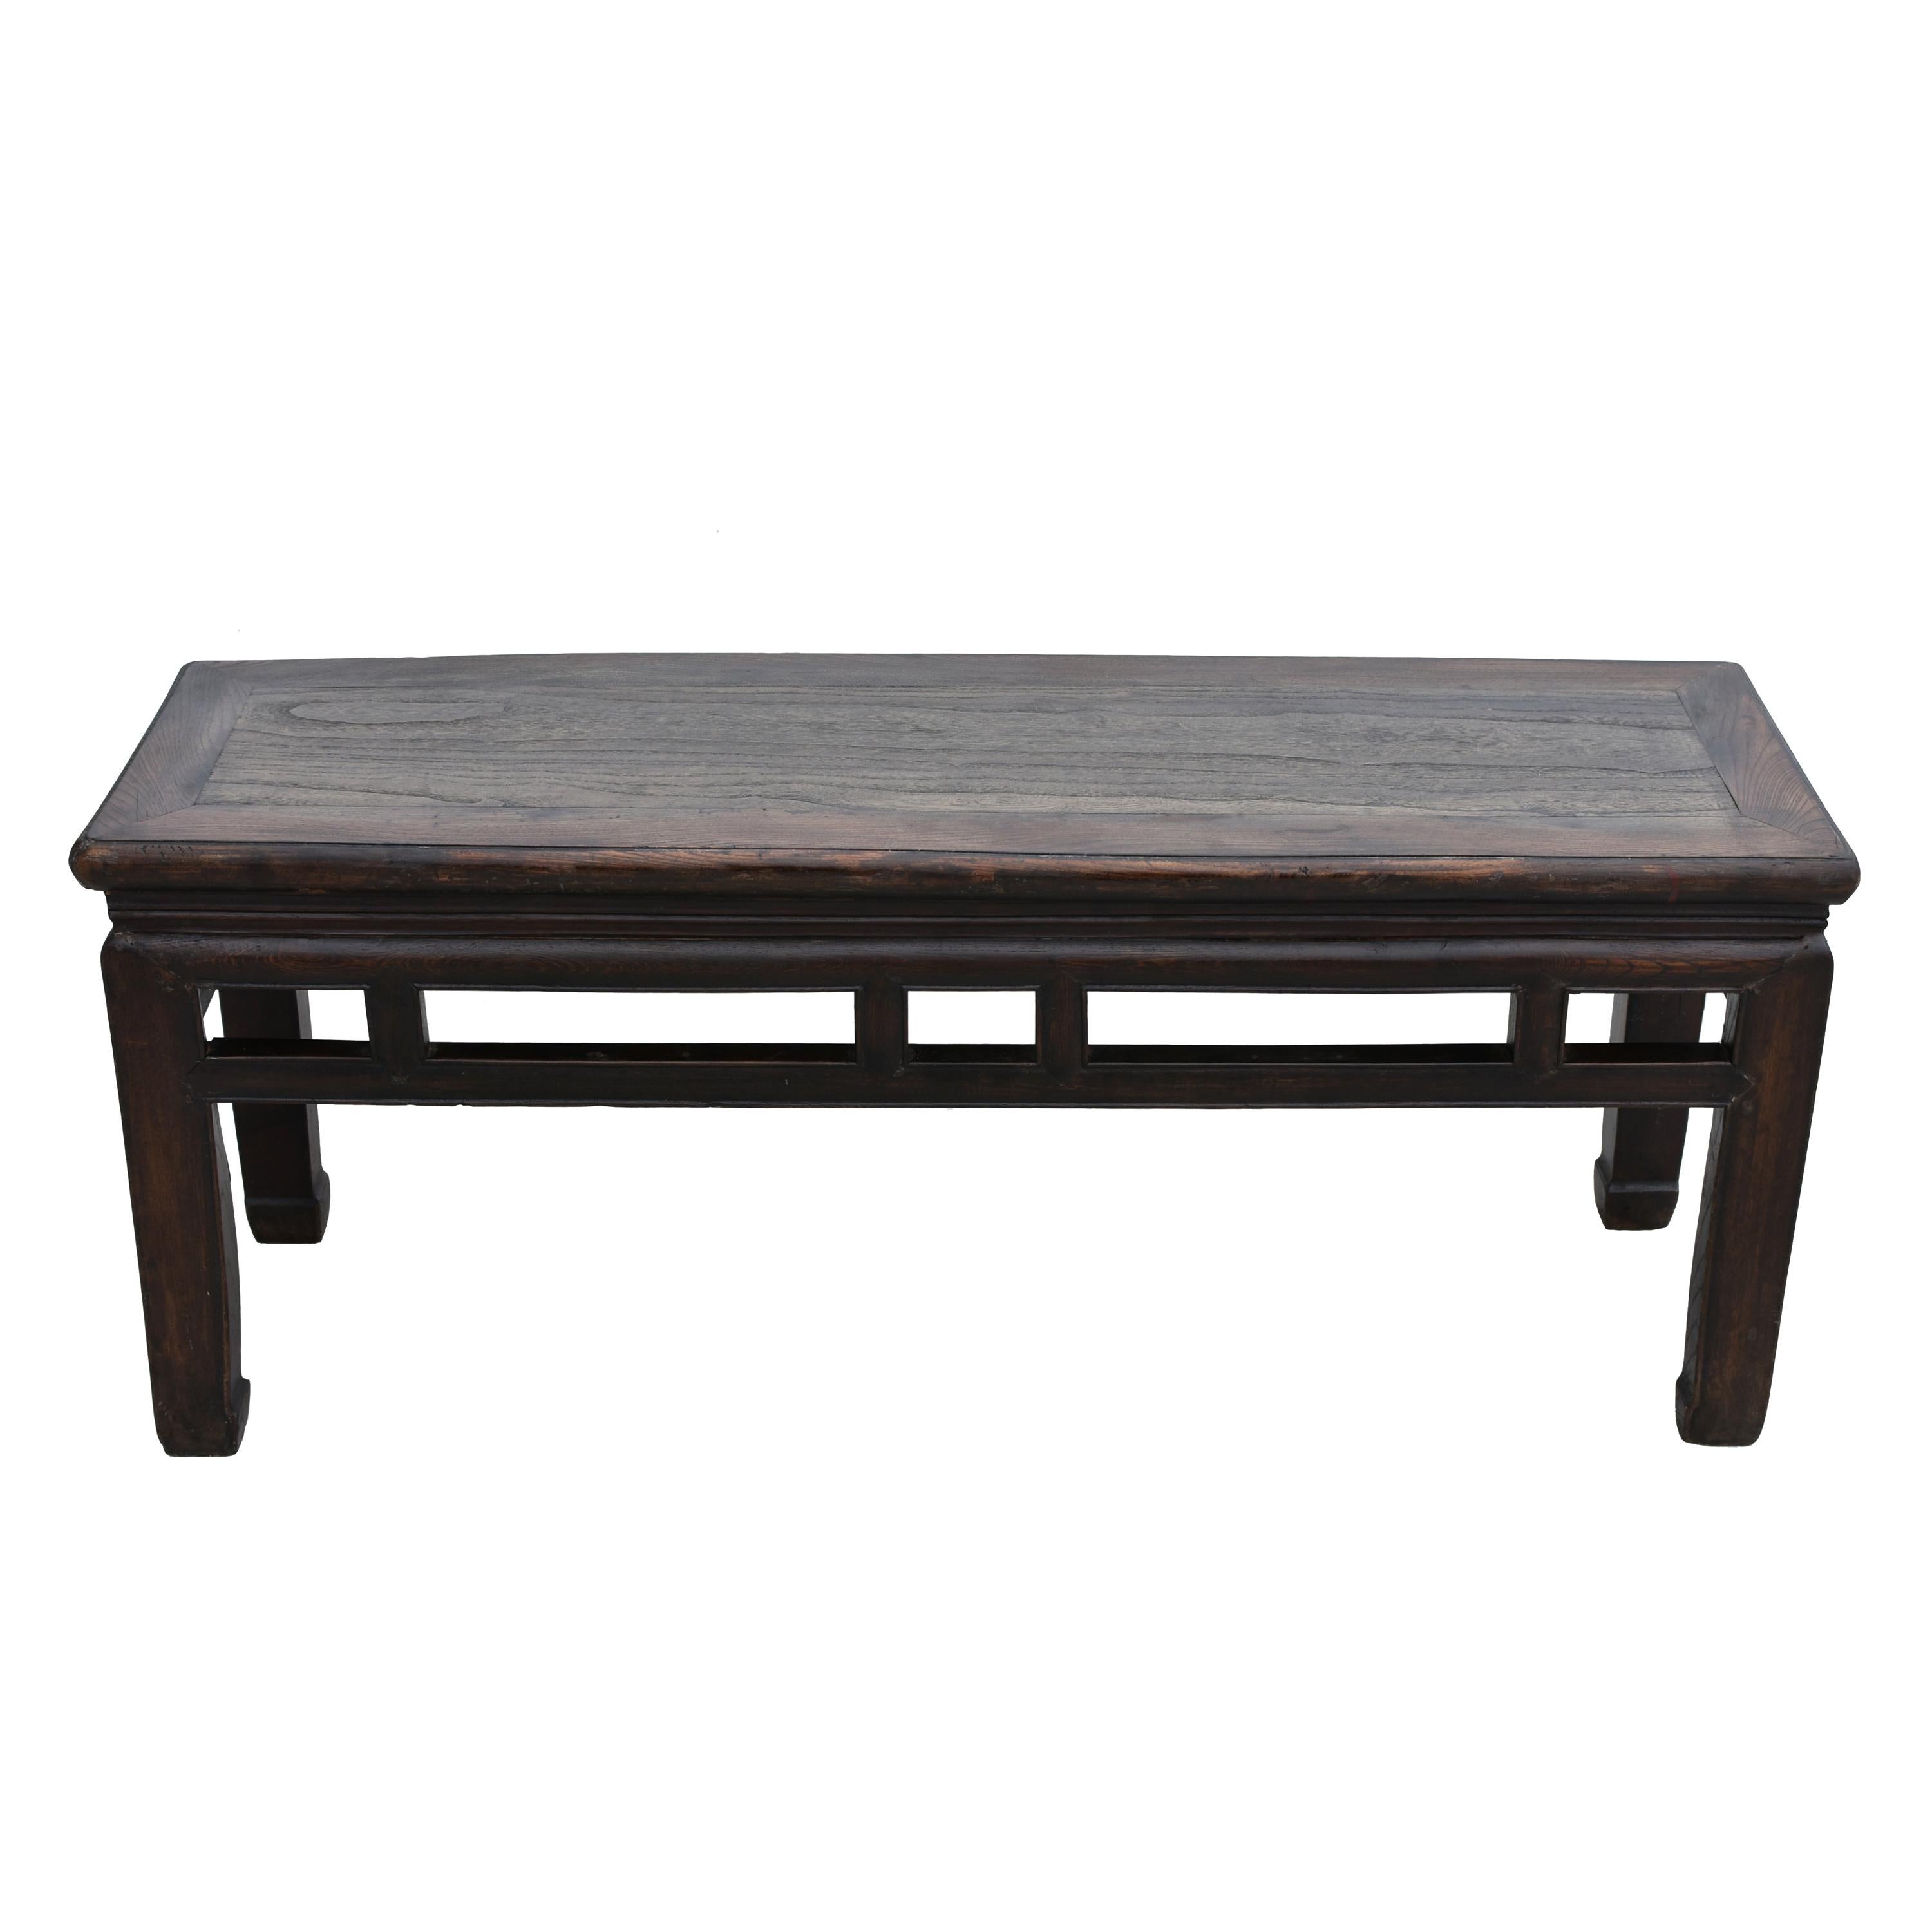 Chinese Antique Bench Solid Wood Ming Style Spring Bench